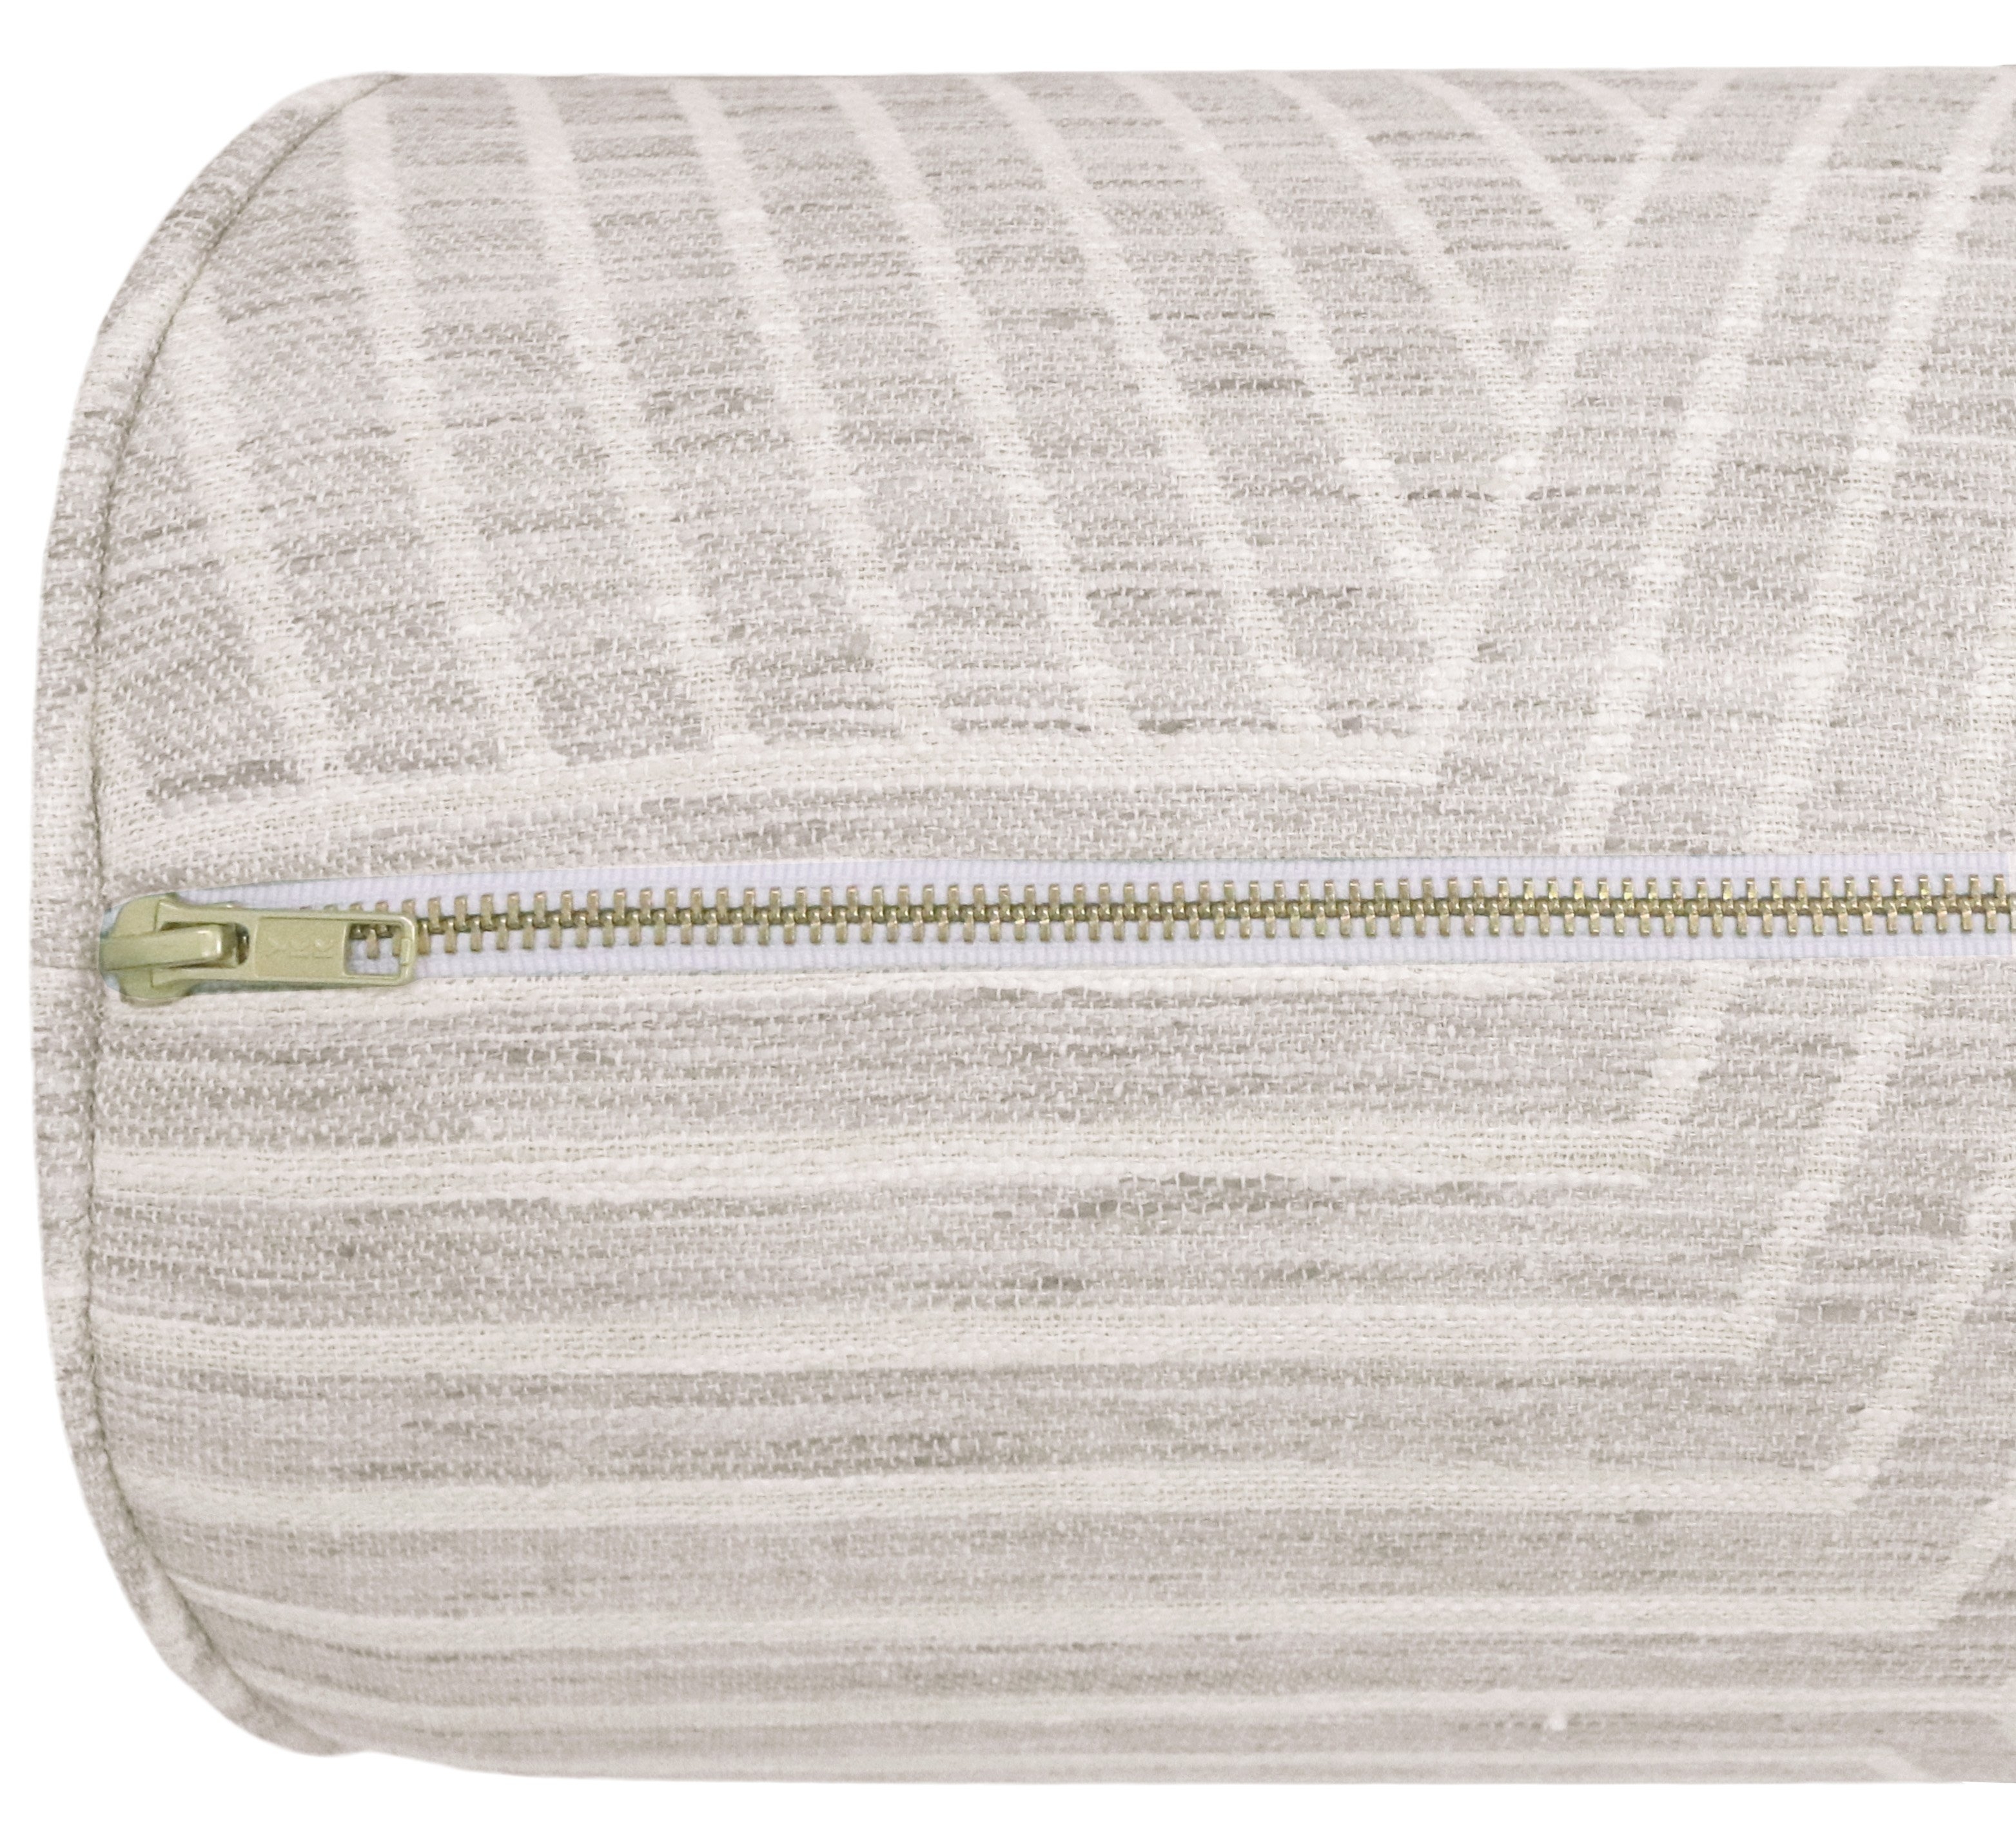 THE BOLSTER :: LABYRINTH LINEN // OYSTER - QUEEN // 9" X 36" - Image 6